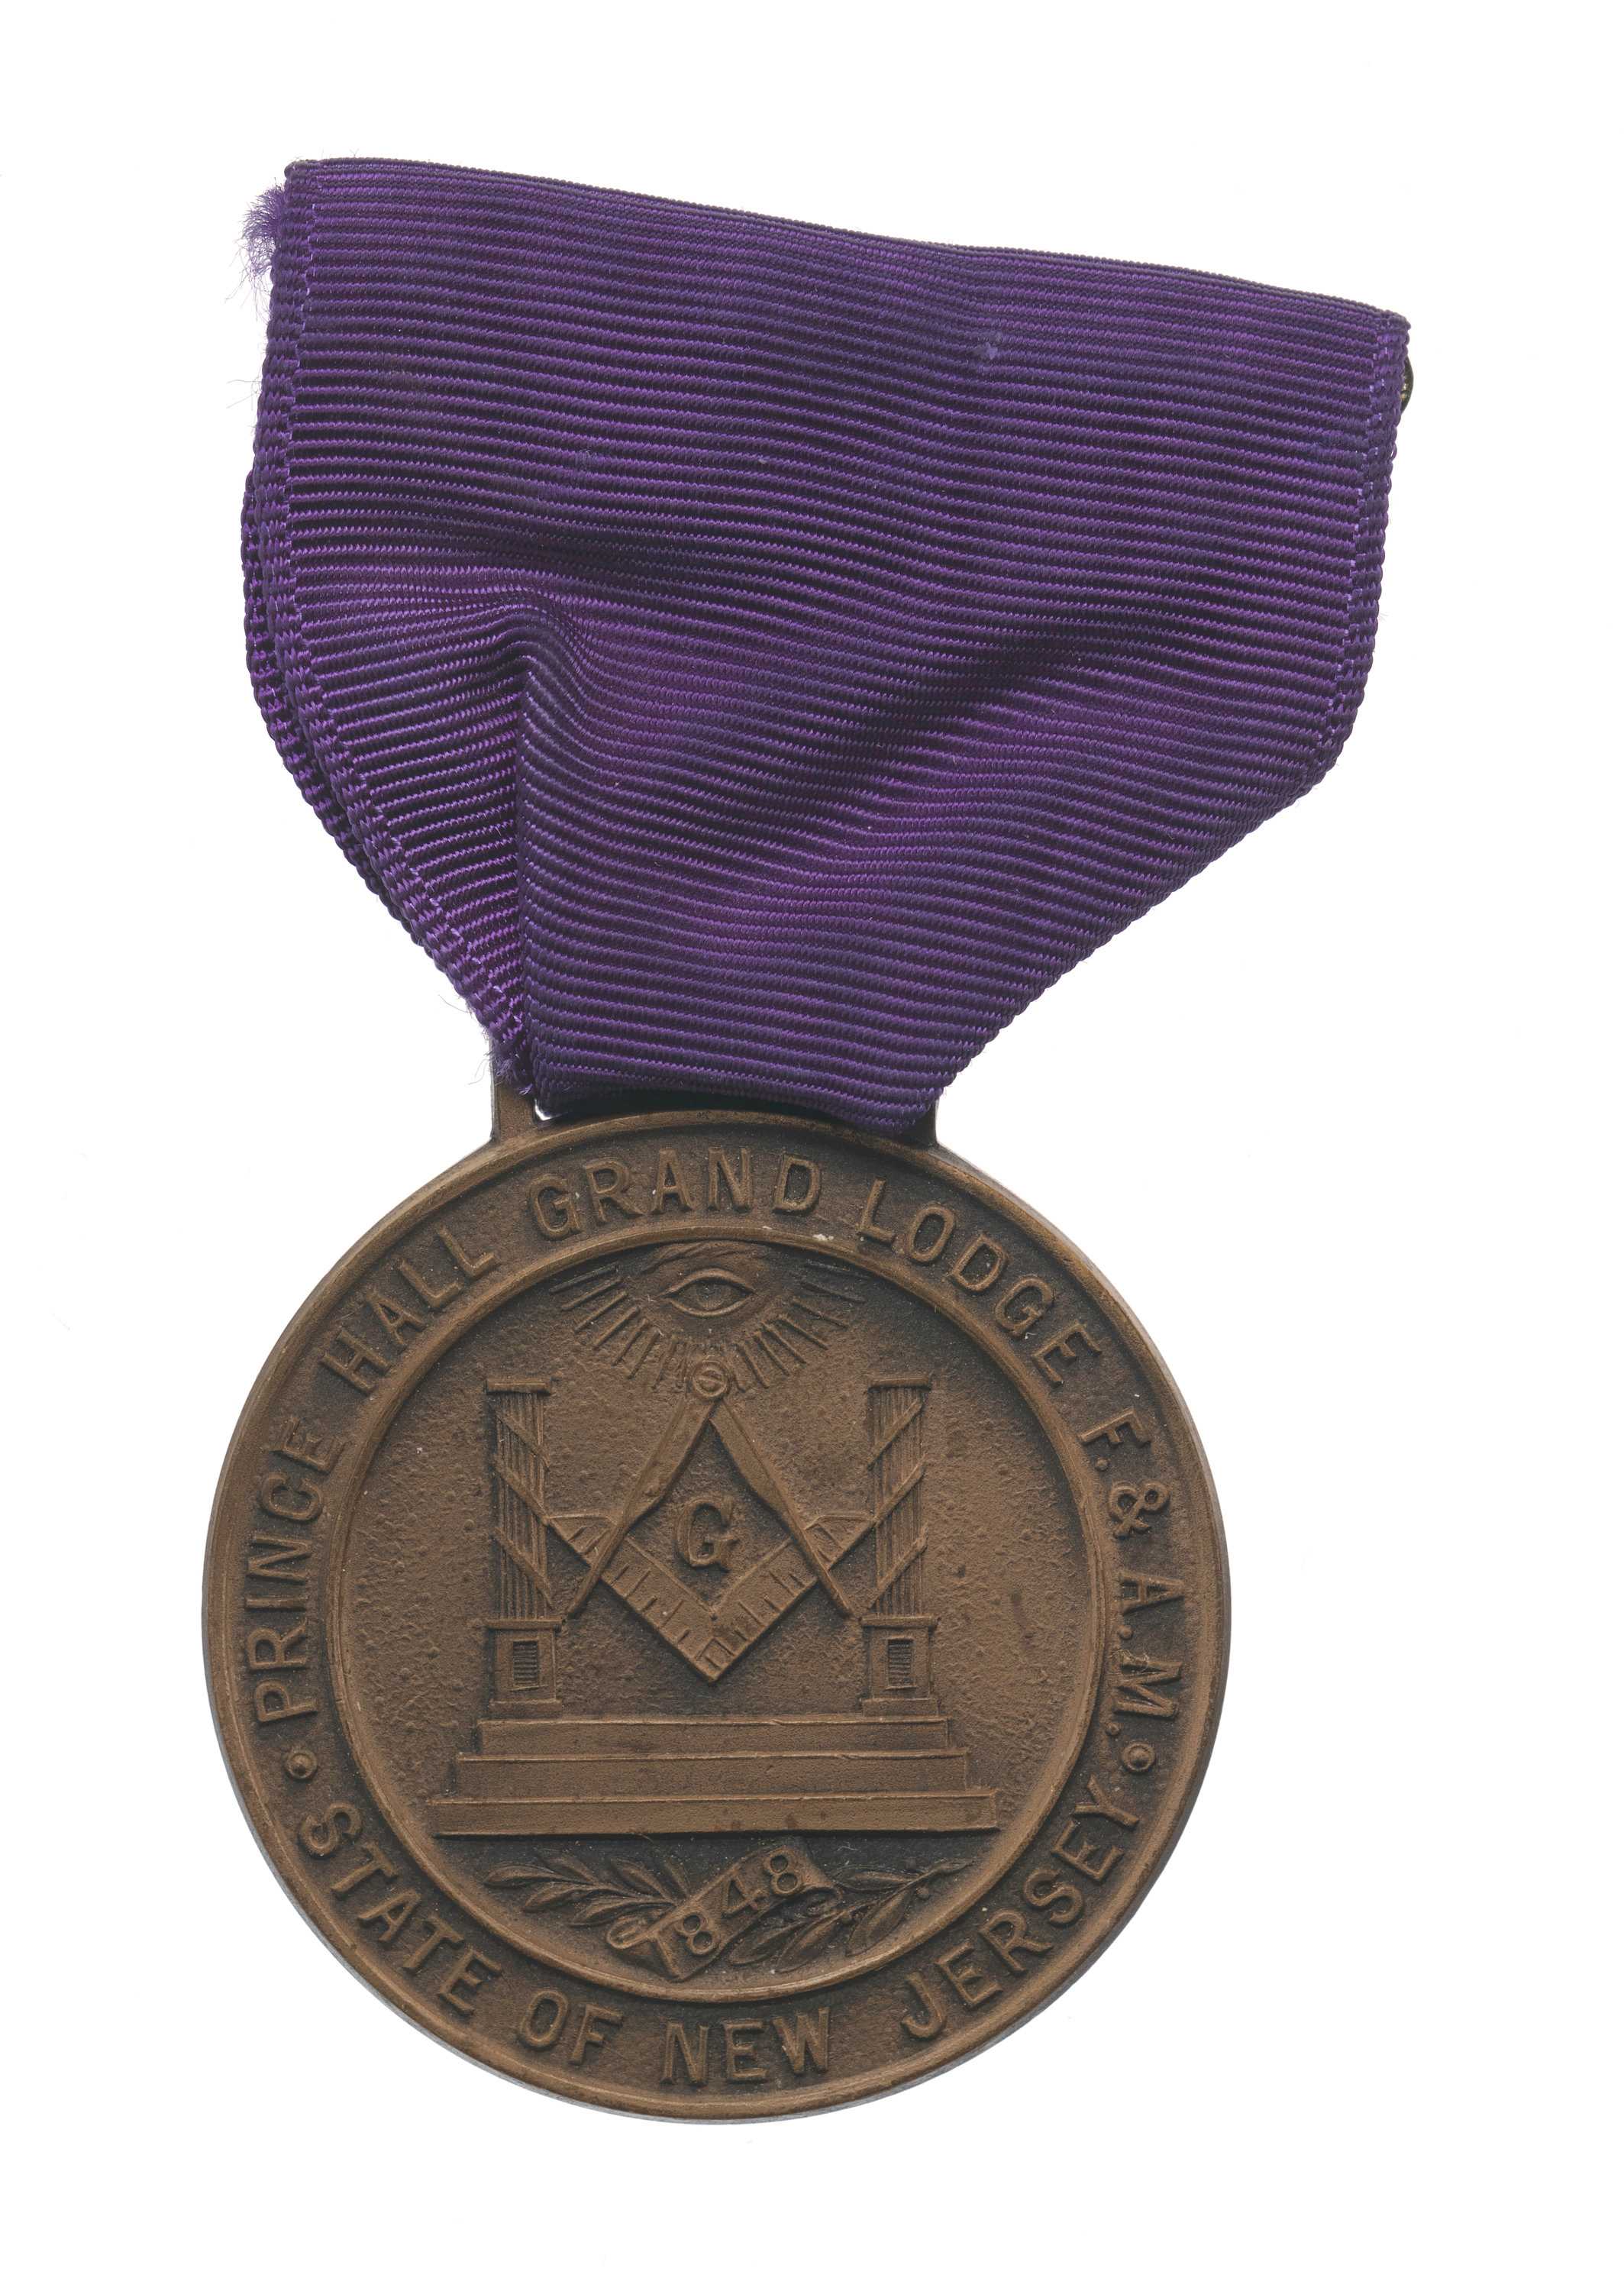 A commemorative medal for the 100th anniversary of the Prince Hall Grand Lodge of New Jersey.